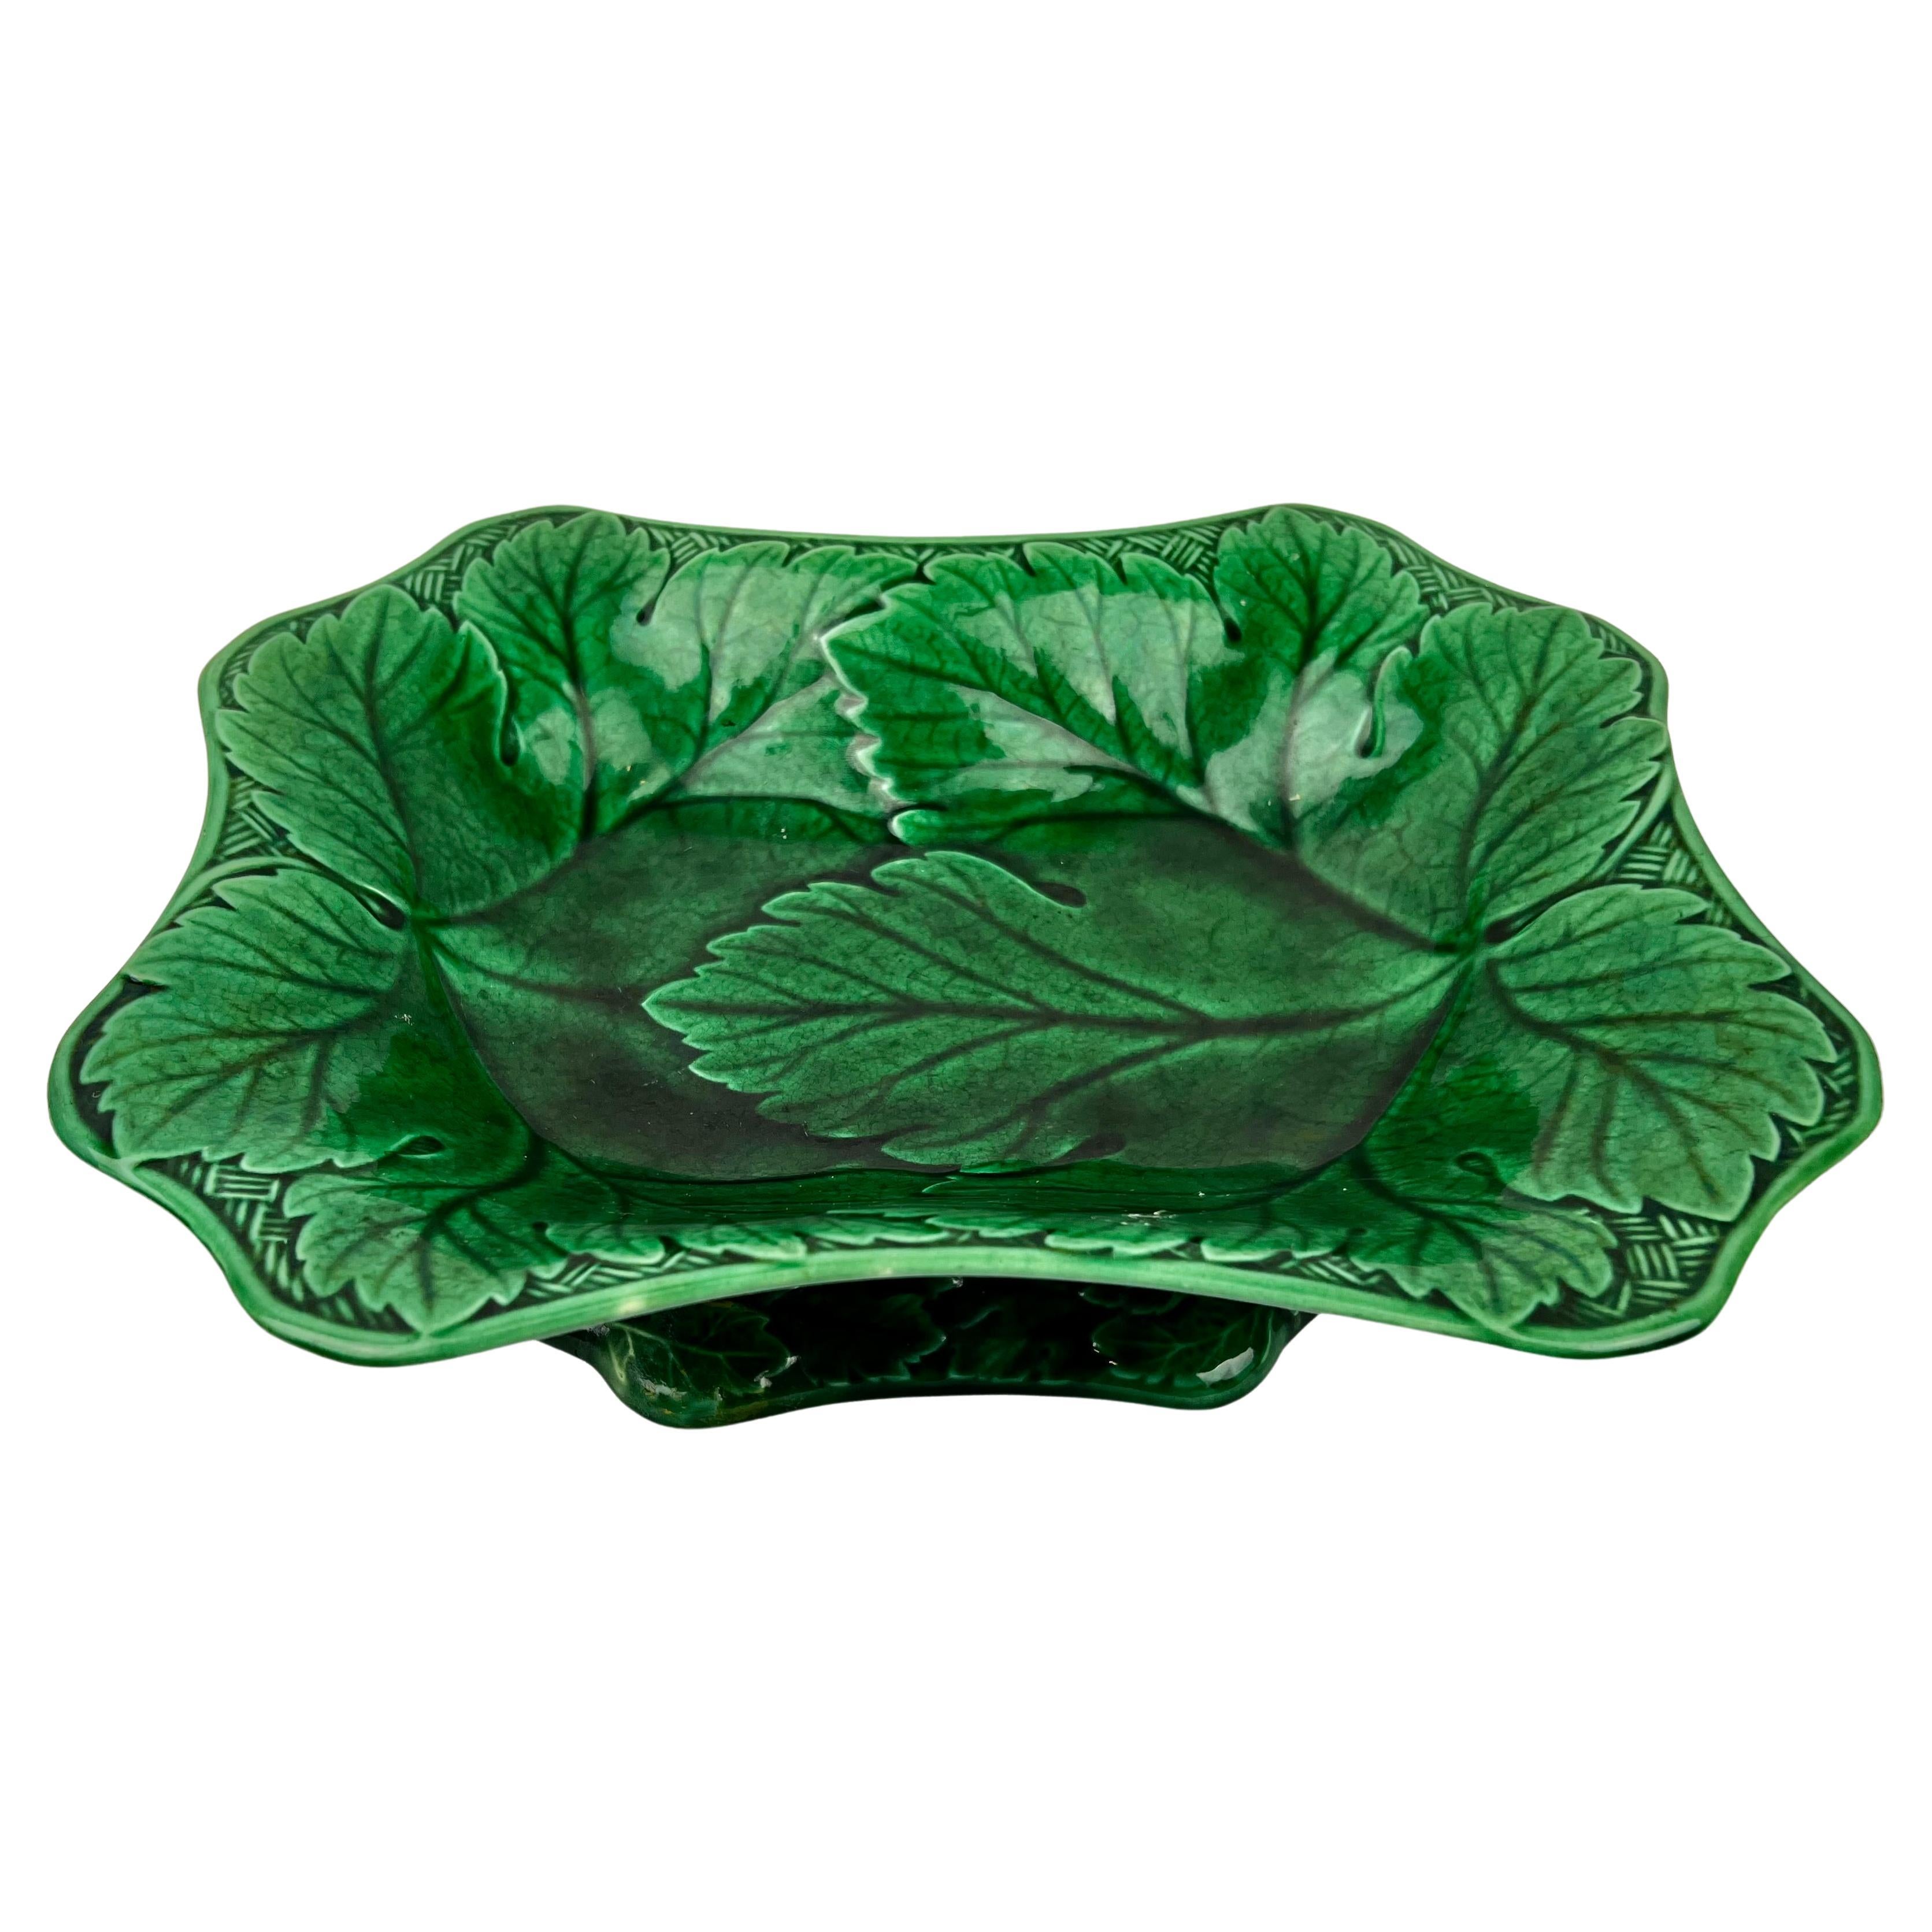 Wedgwood Majolica Ming Green Leaf Motif Footed Serving Dish  For Sale